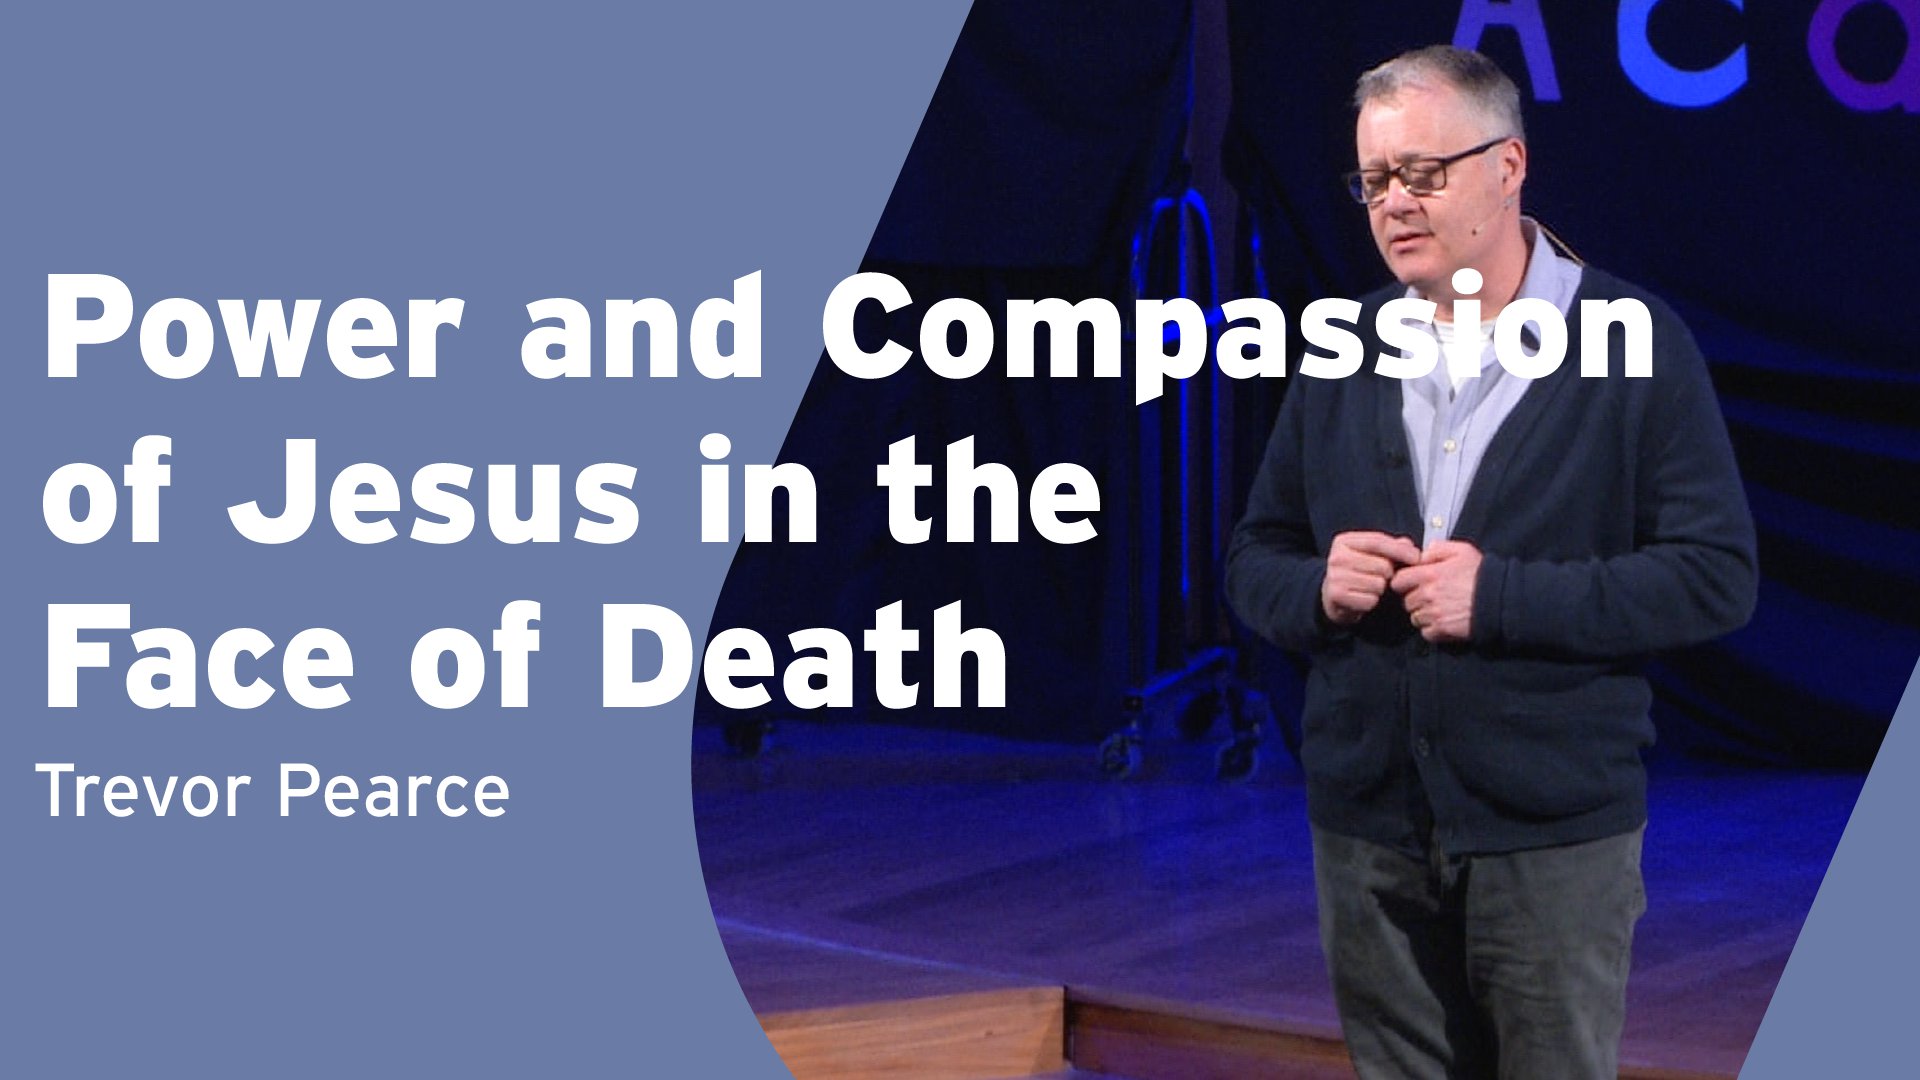 Power and Compassion of Jesus in the Face of Death